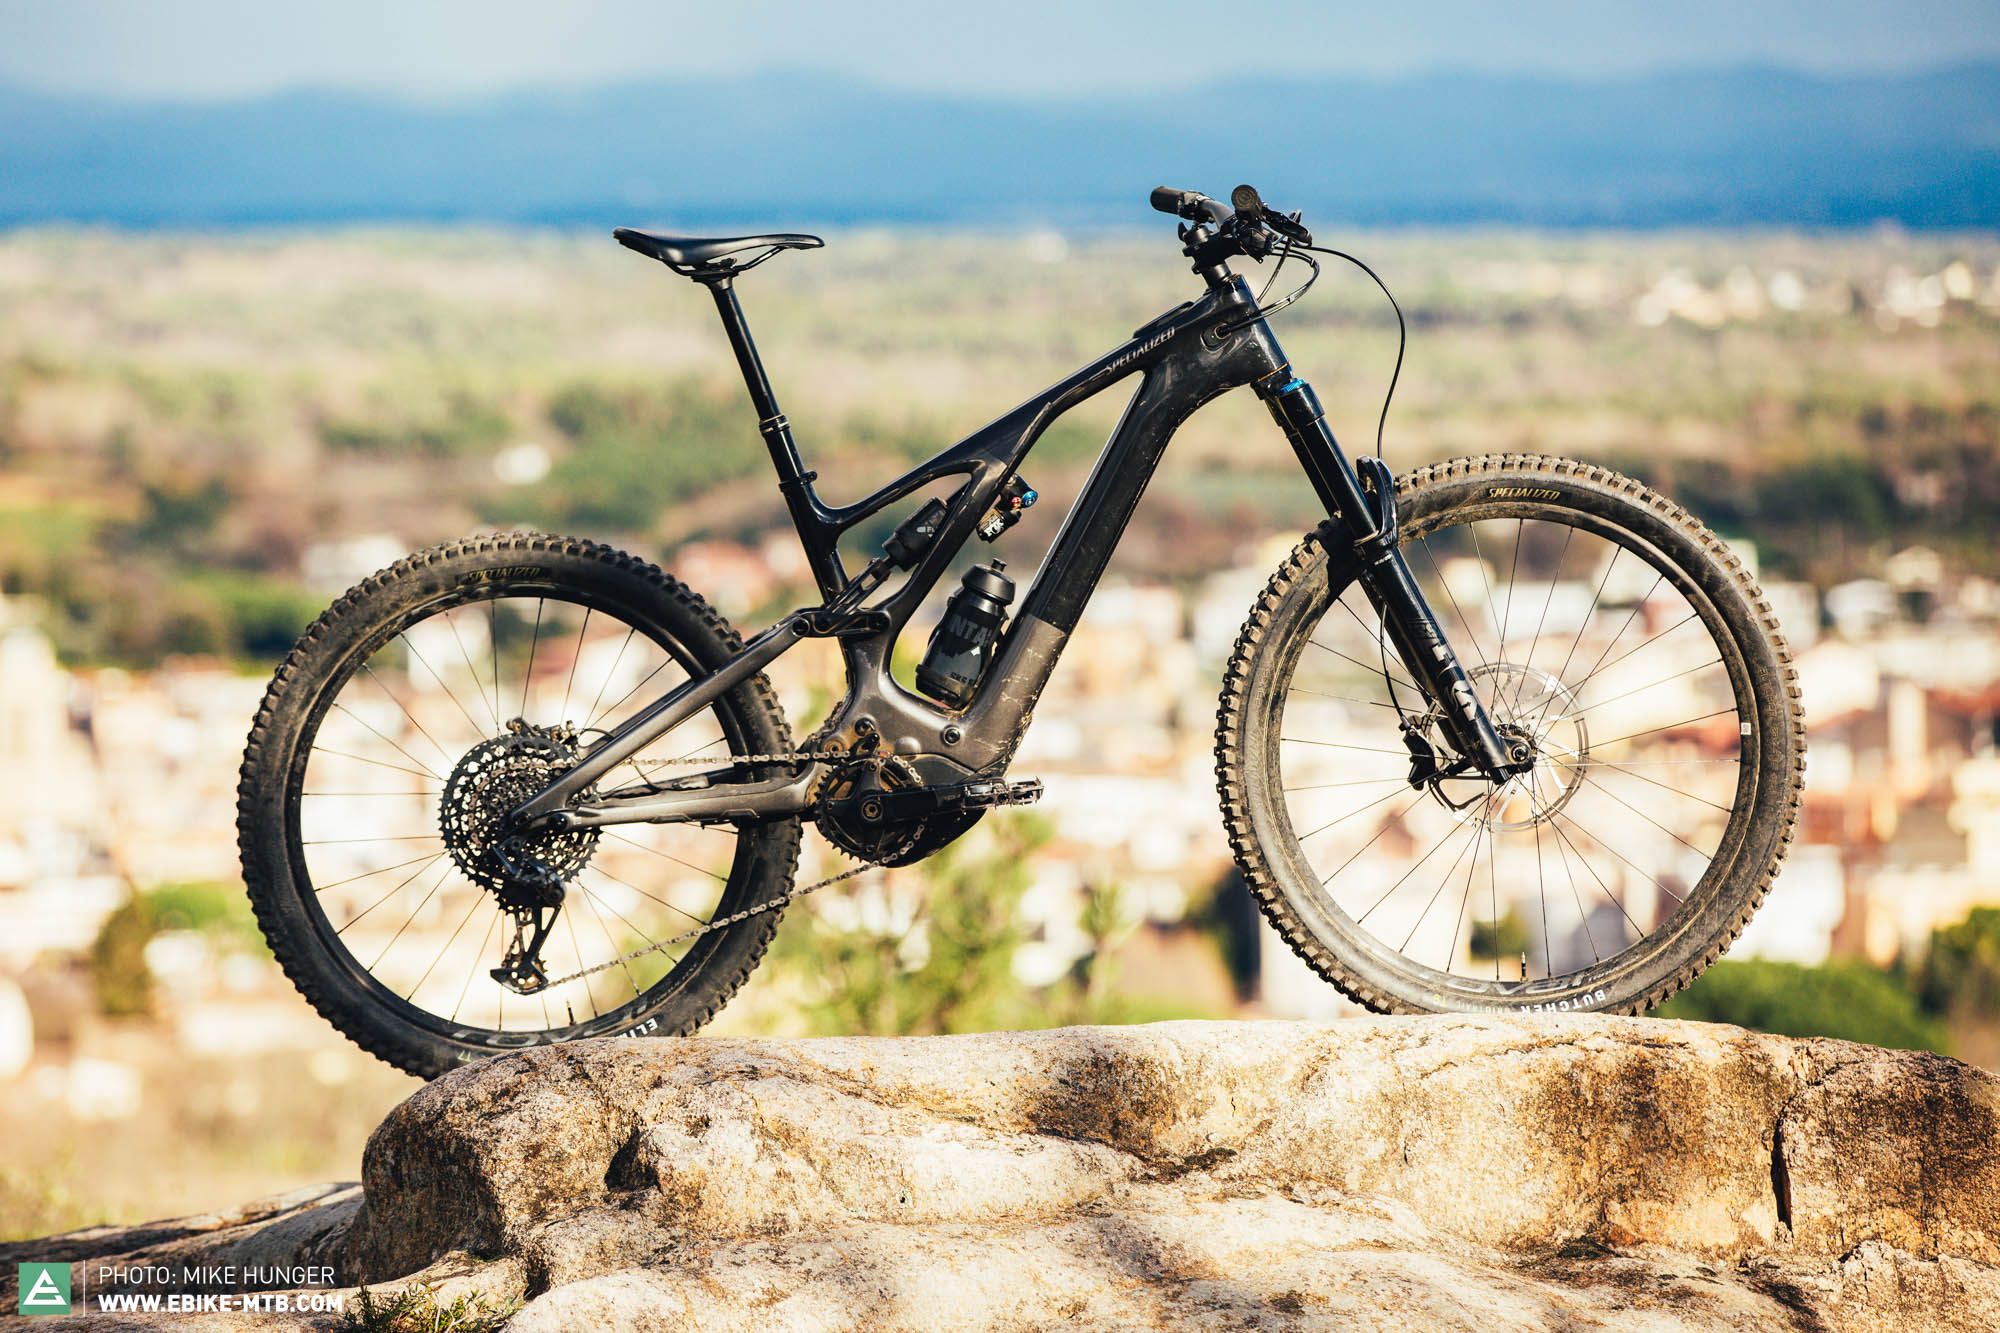 The Specialized Turbo Levo Expert